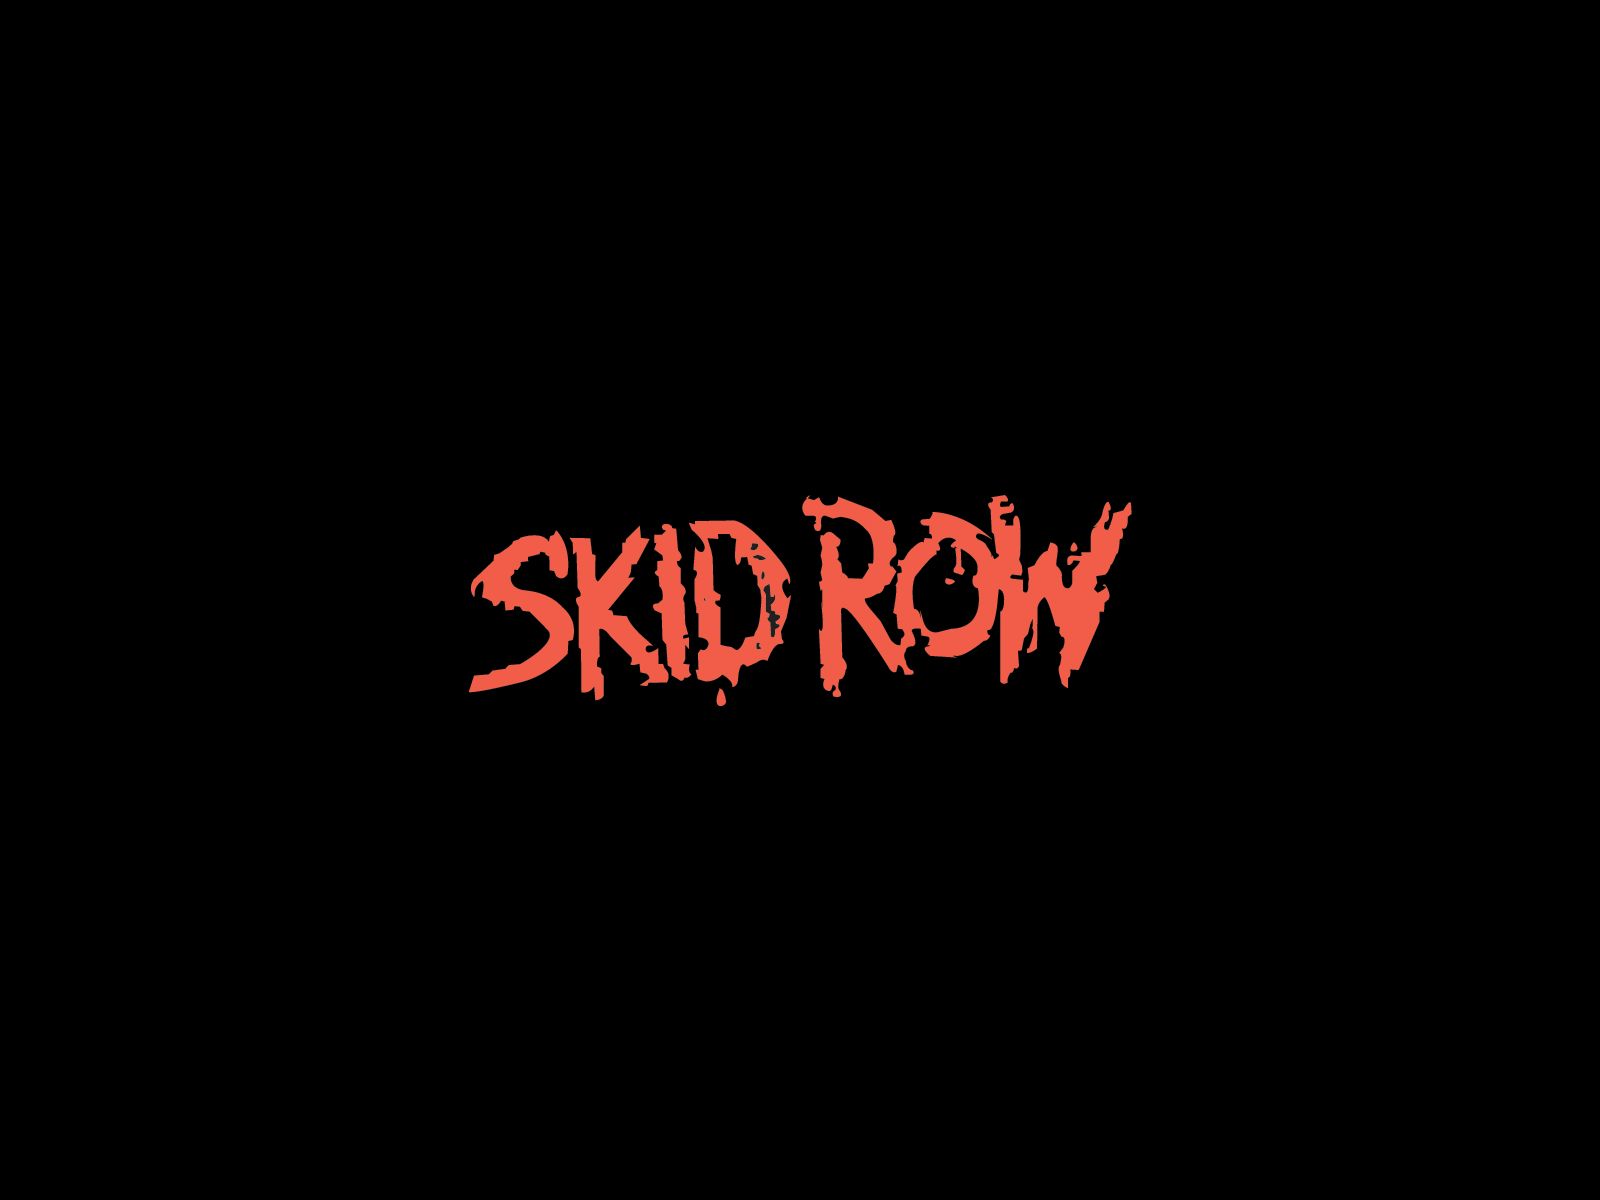 Posts about Glam Metal on Band logos band logos, metal bands logos, punk bands logos. Rock band logos, Punk bands logos, Skid row